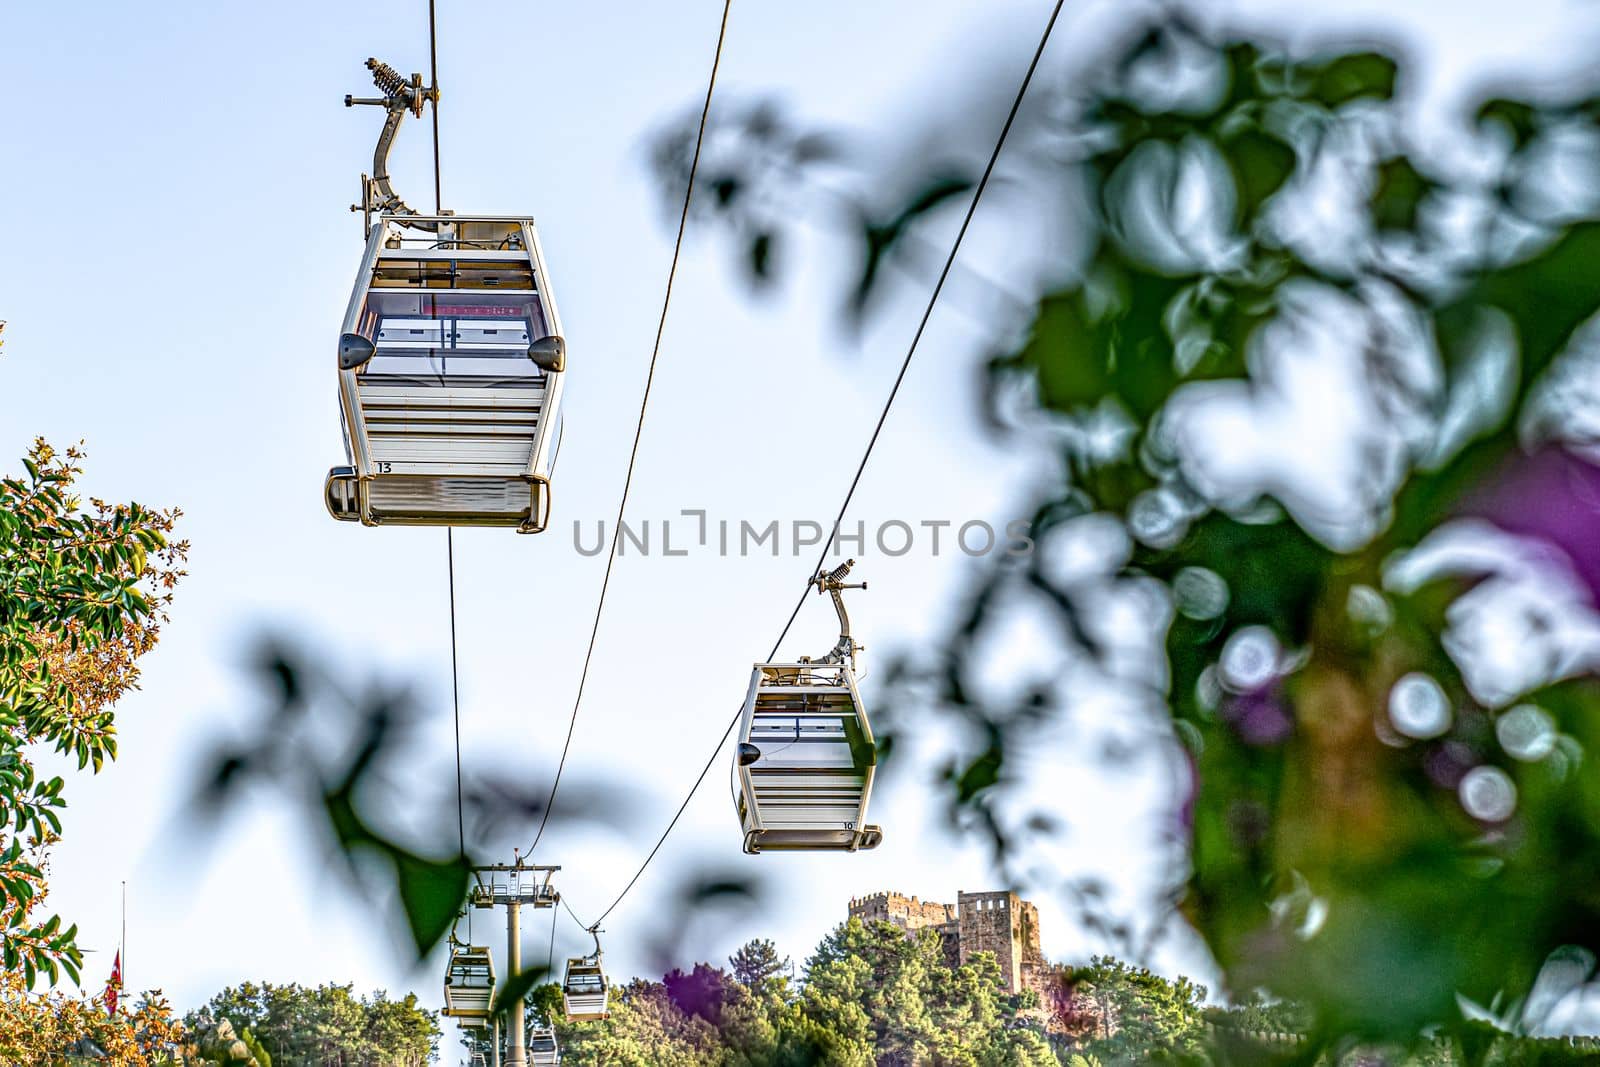 Cableway cabins on background of sky, flowers, and plants, close-up